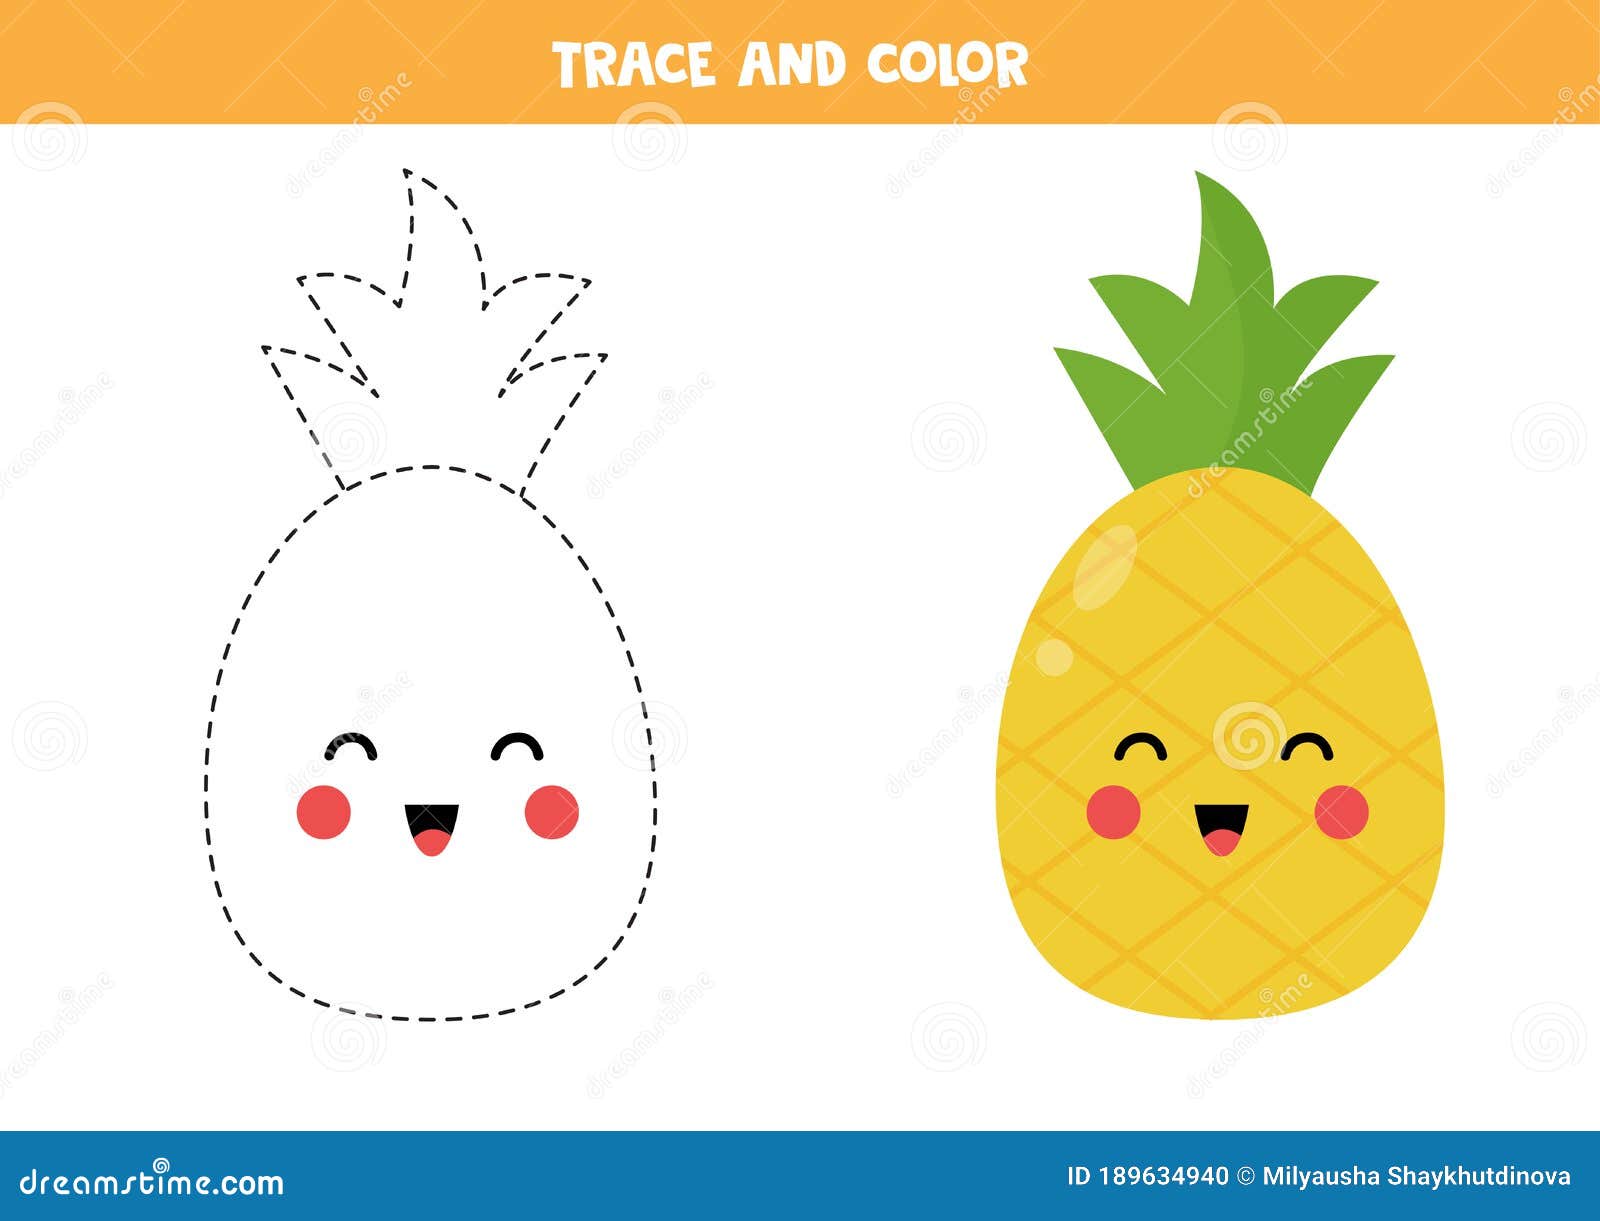 Trace and Color Cute Kawaii Pineapple Fruit Stock Vector ...